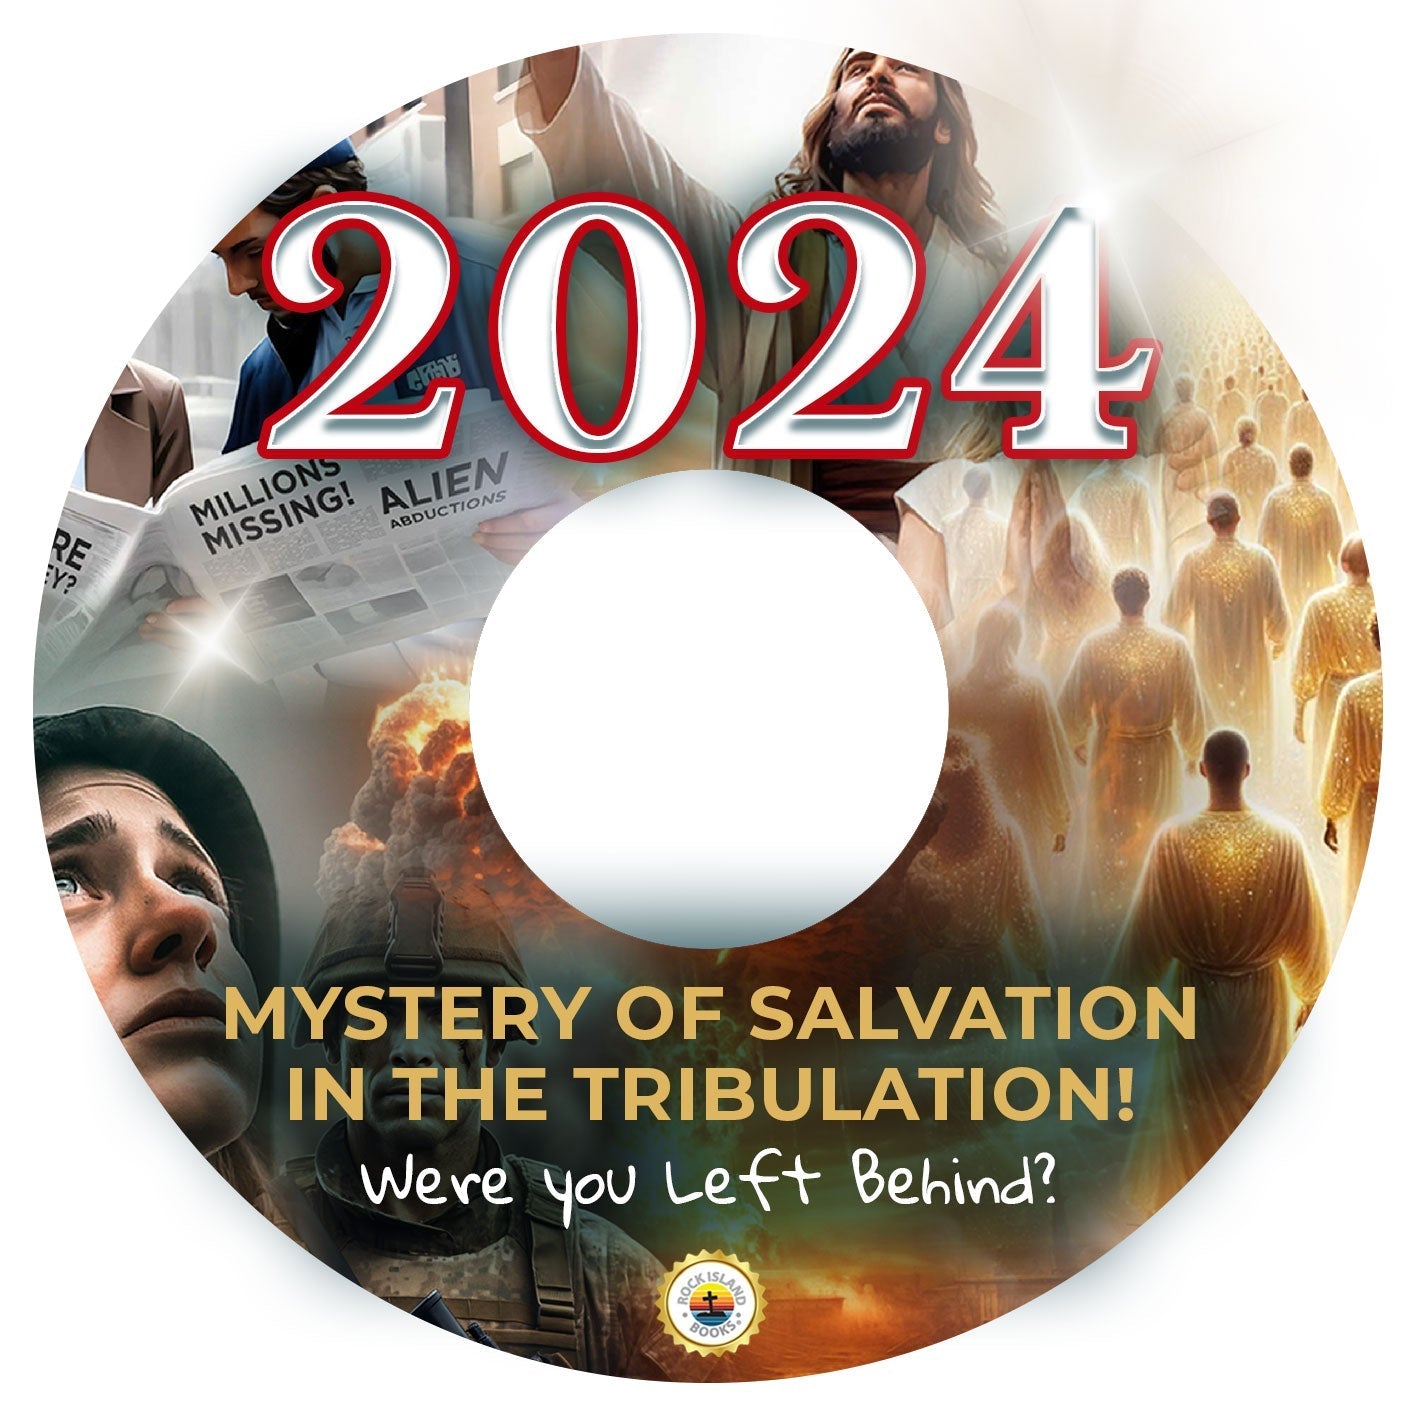 2024: Mystery of Salvation in the Tribulation USB Flash Drive - Were you left behind?